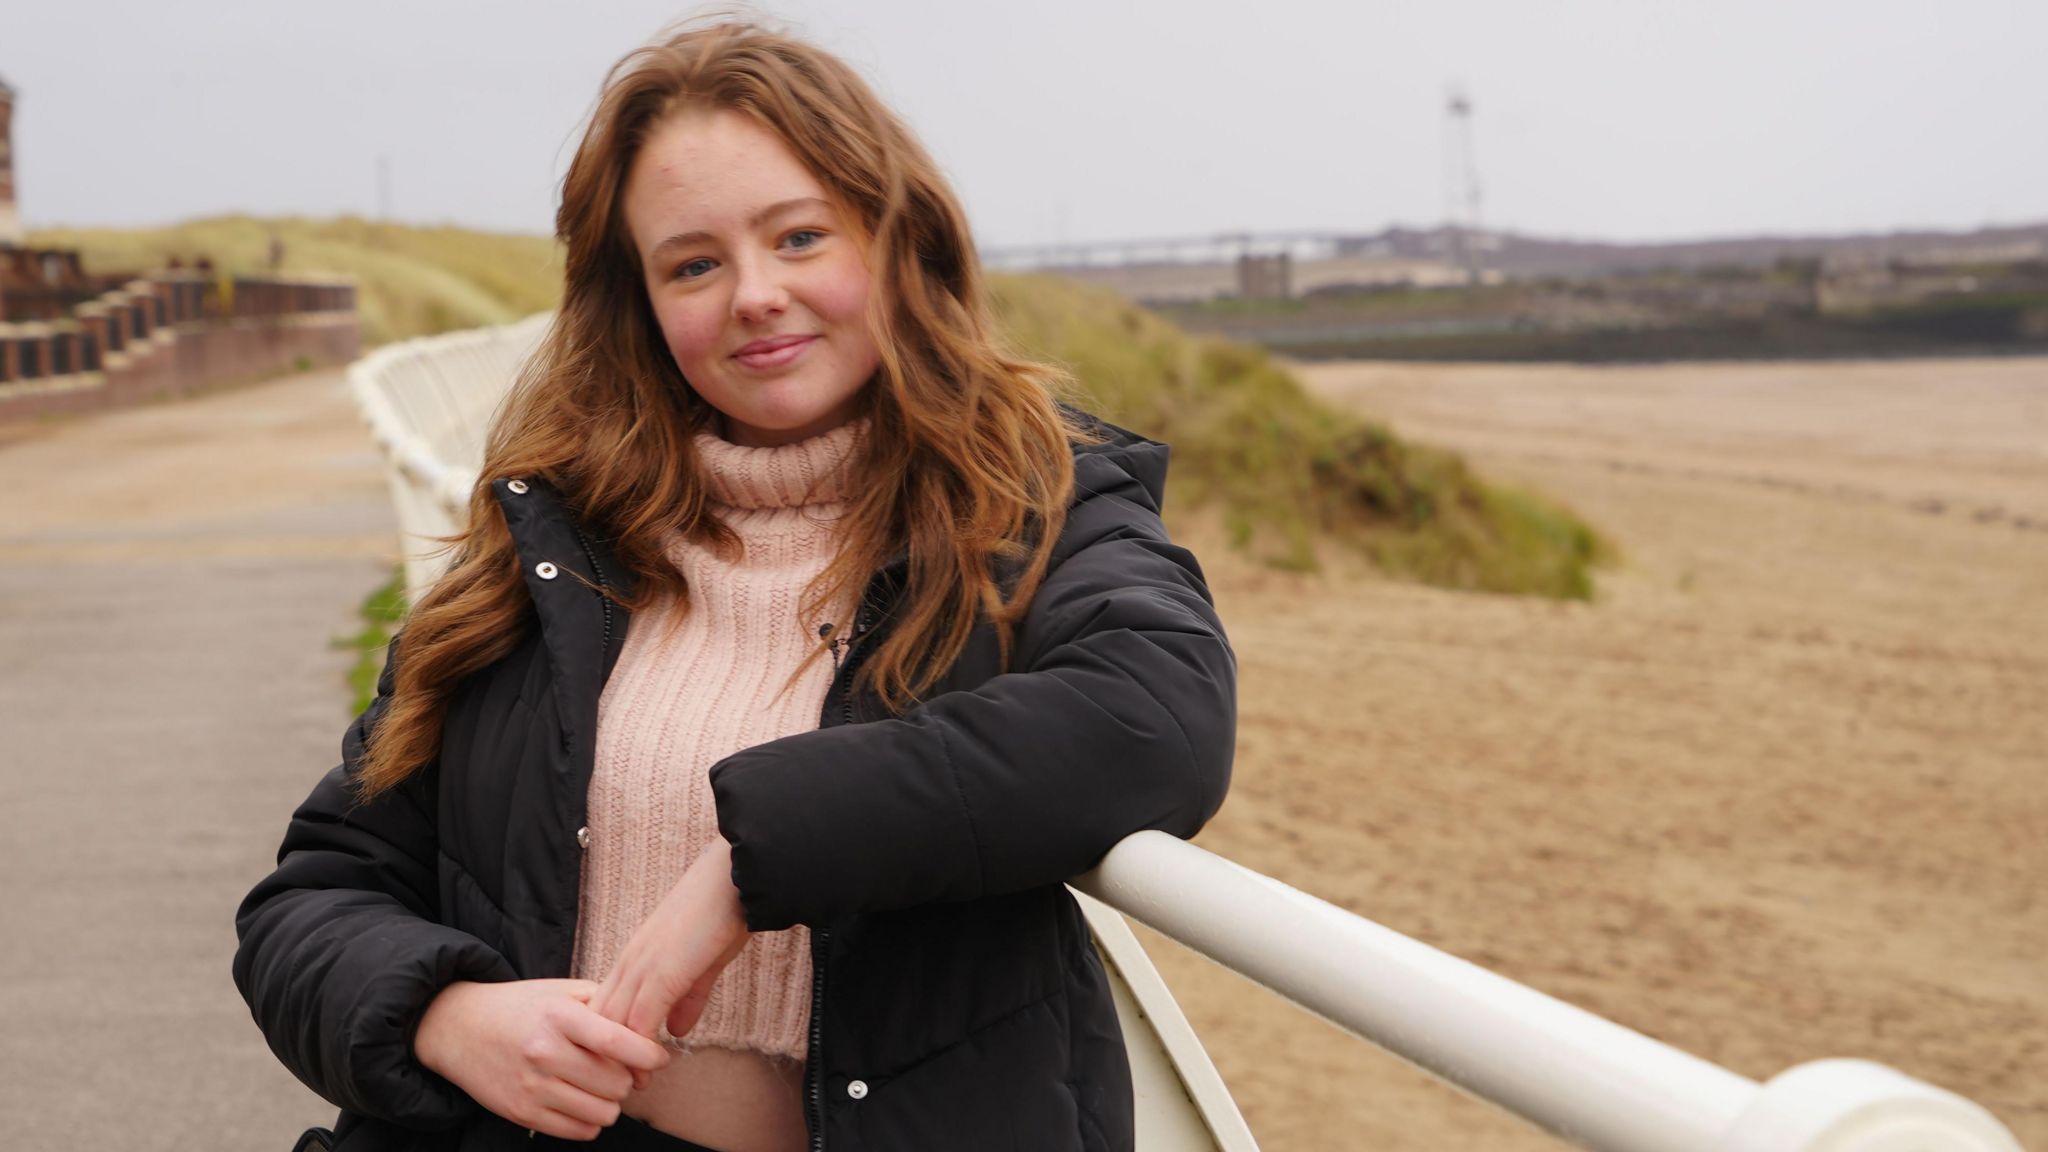 15 year old Lauren stands by Aberavon beach, leaning on a fence, smiling into camera.